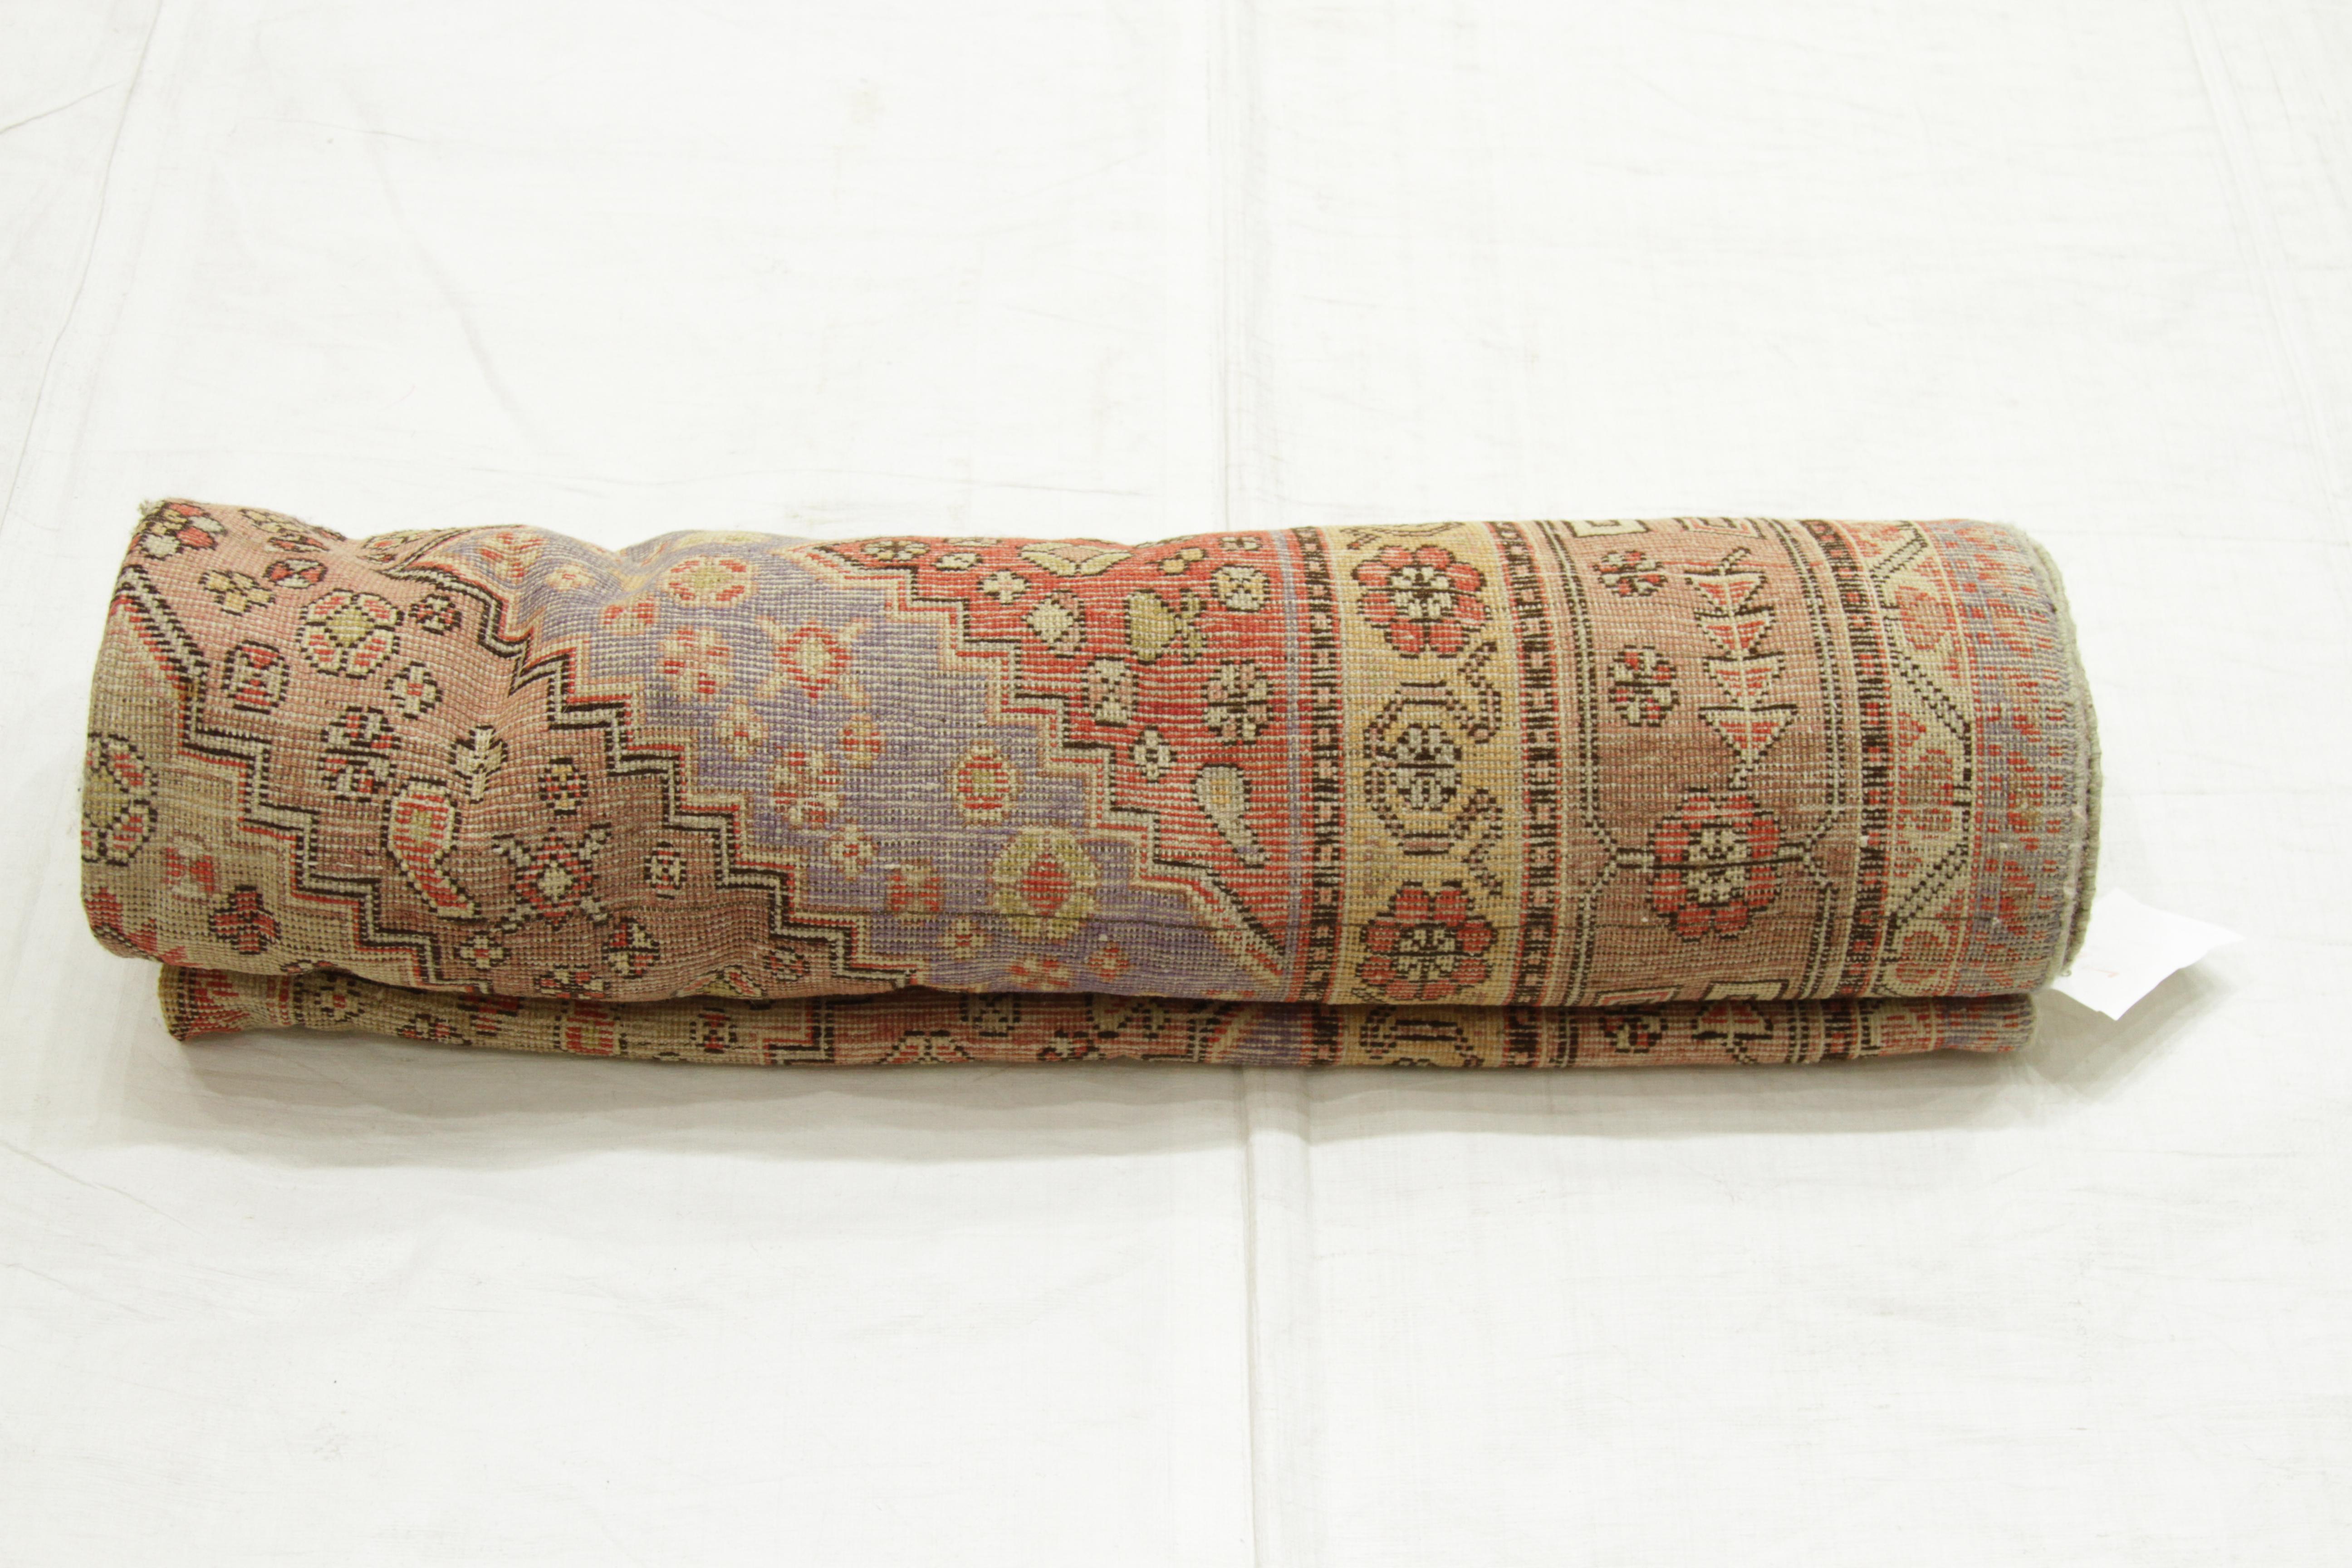 1950s Antique Central Asian Rug Khotan Style with Elaborate Floral Motif For Sale 2